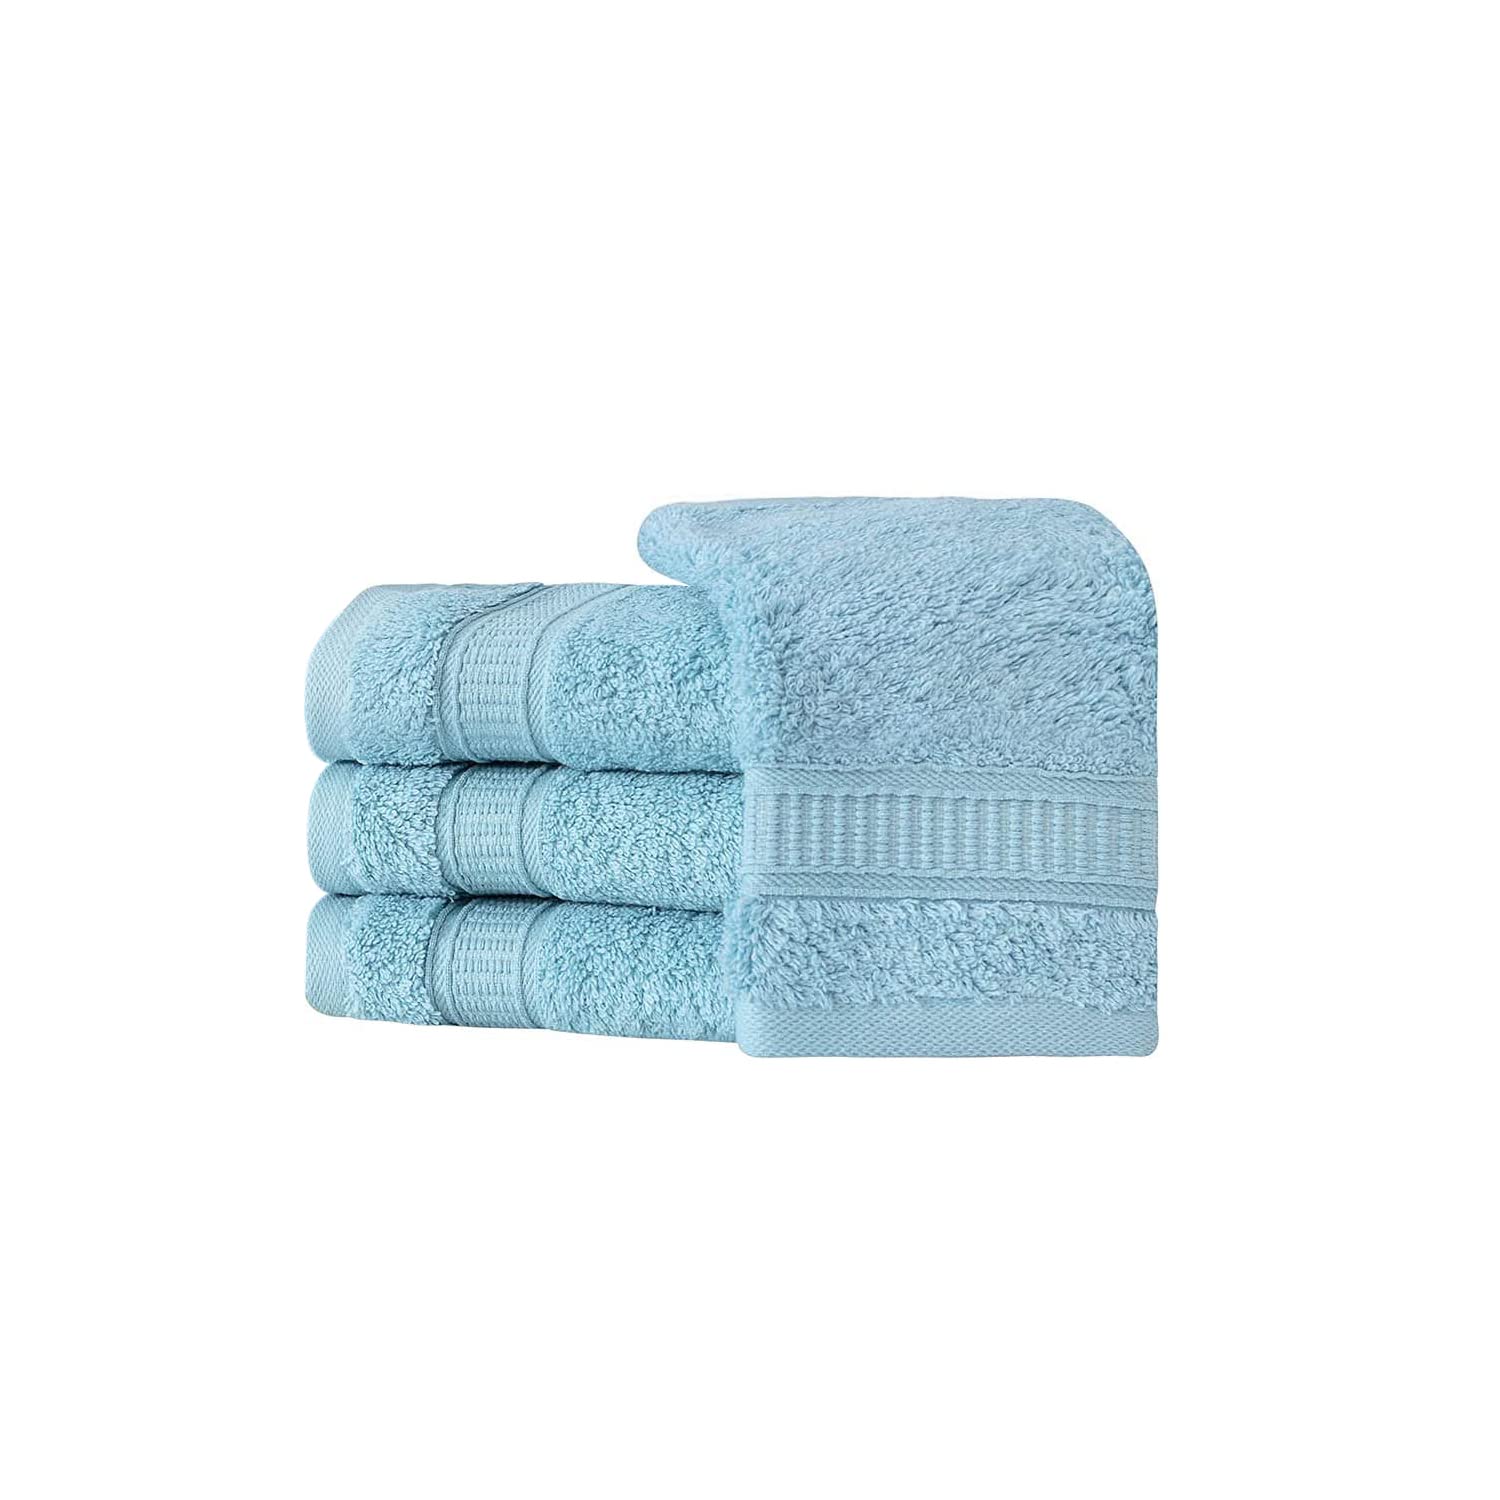 4 Piece 13” × 13” Soft Turkish Cotton Washcloths for Bathroom, Kitchen, Hotel, Spa, Gym & College Dorm | Absorbent and Super Soft Washcloth Set for Body & Face, Baby and Adults - Aqua